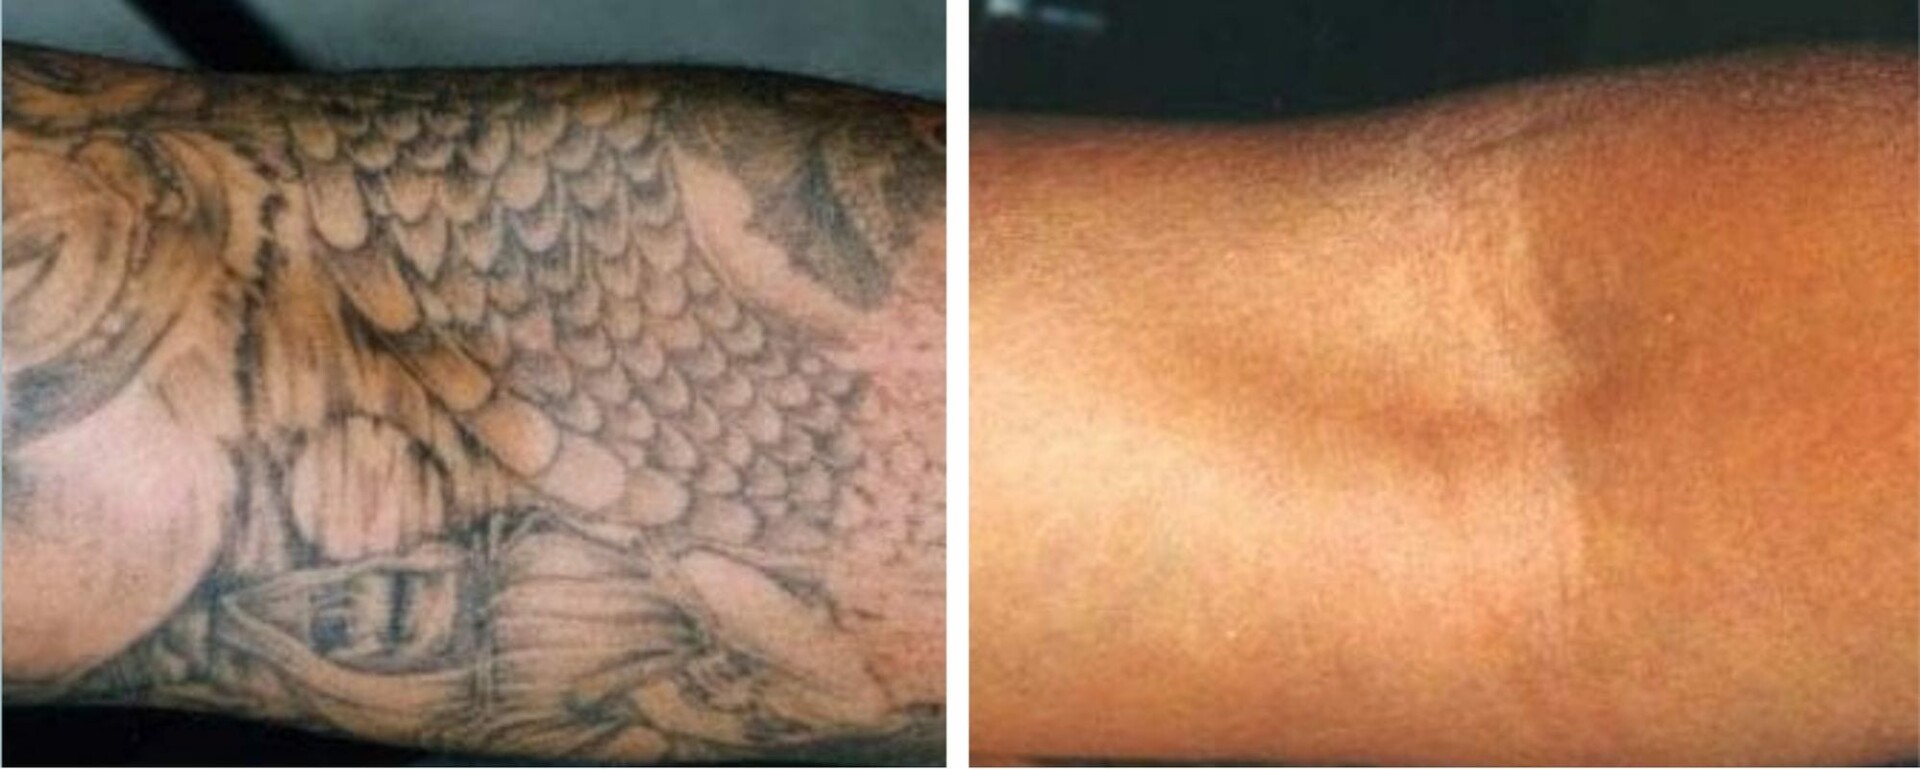 Is Tattoo Removal Safe? 5 Methods Reviewed - London Premier Laser & Skin  Clinic